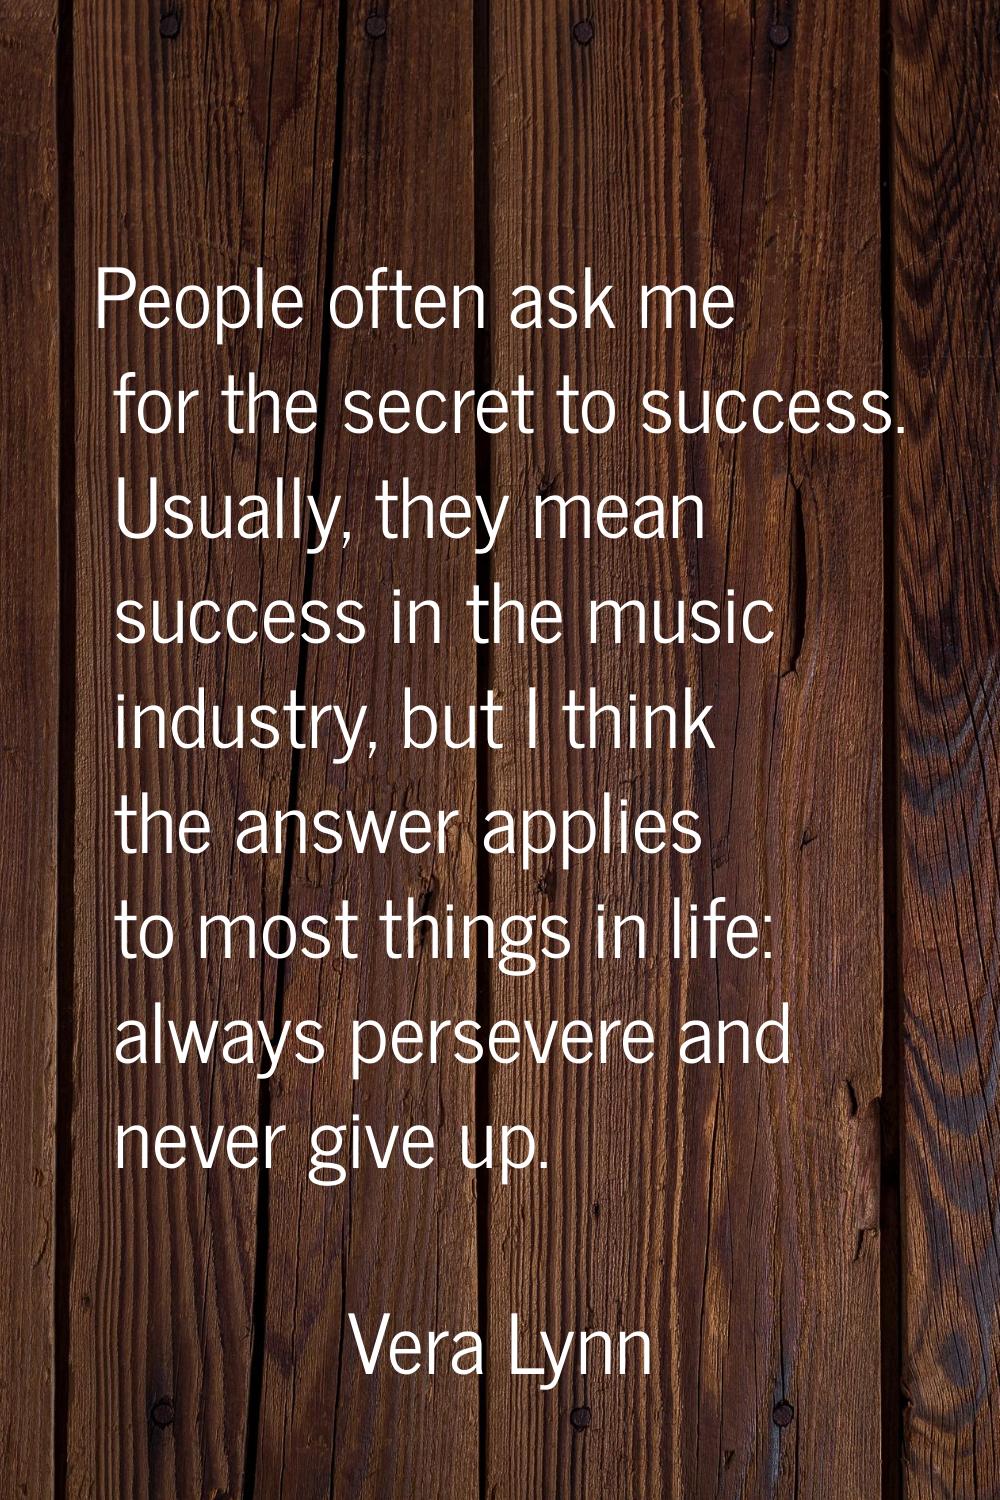 People often ask me for the secret to success. Usually, they mean success in the music industry, bu